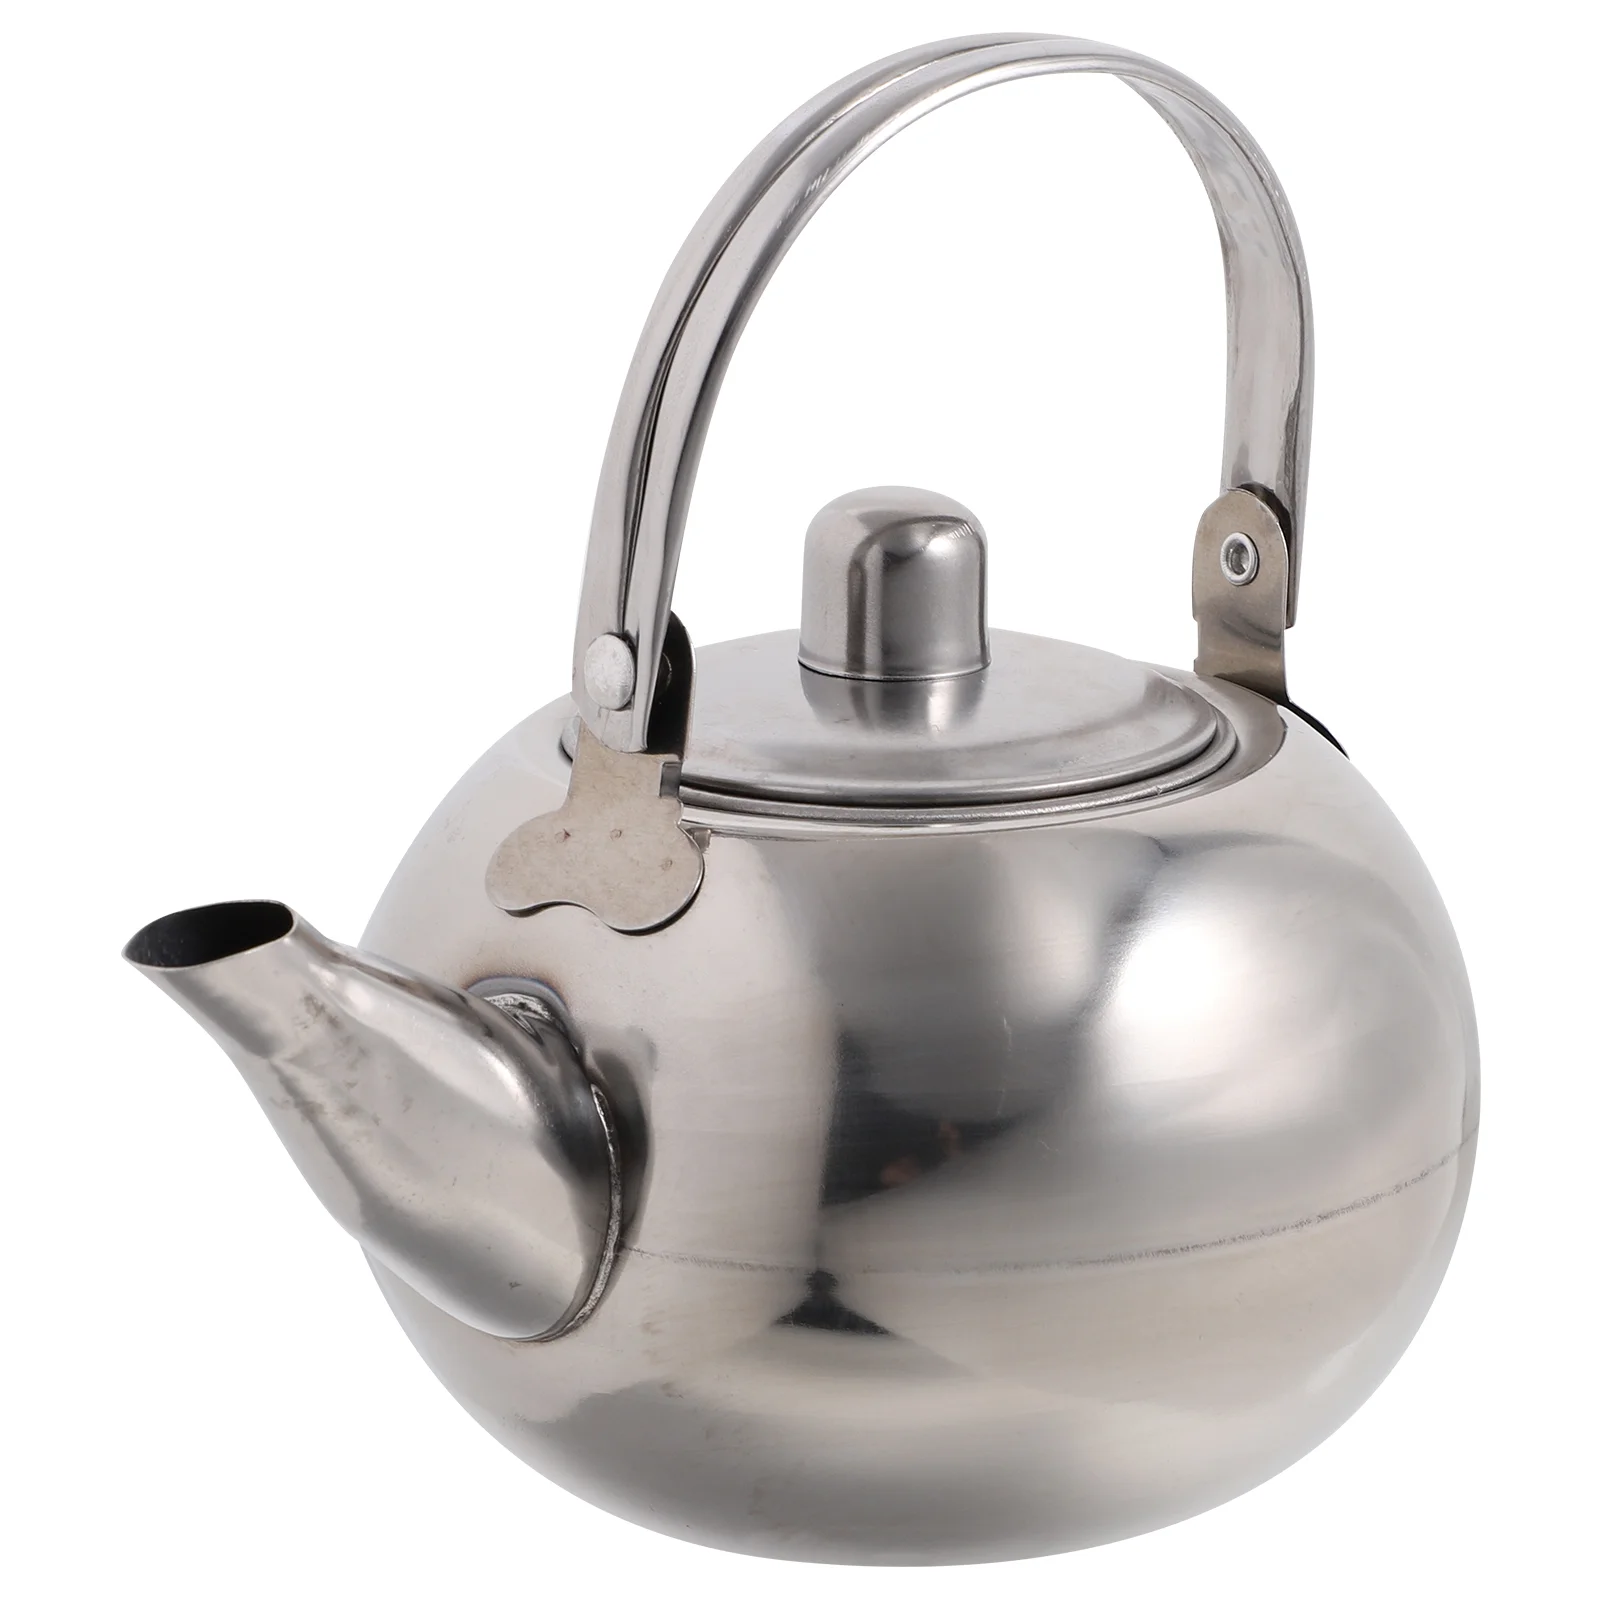 

Kettle Tea Water Teapot Whistling Steel Stovetop Stainless Pot Stove Boiling Top Coffee Gas Hot Teakettle Kettles Metal Heating